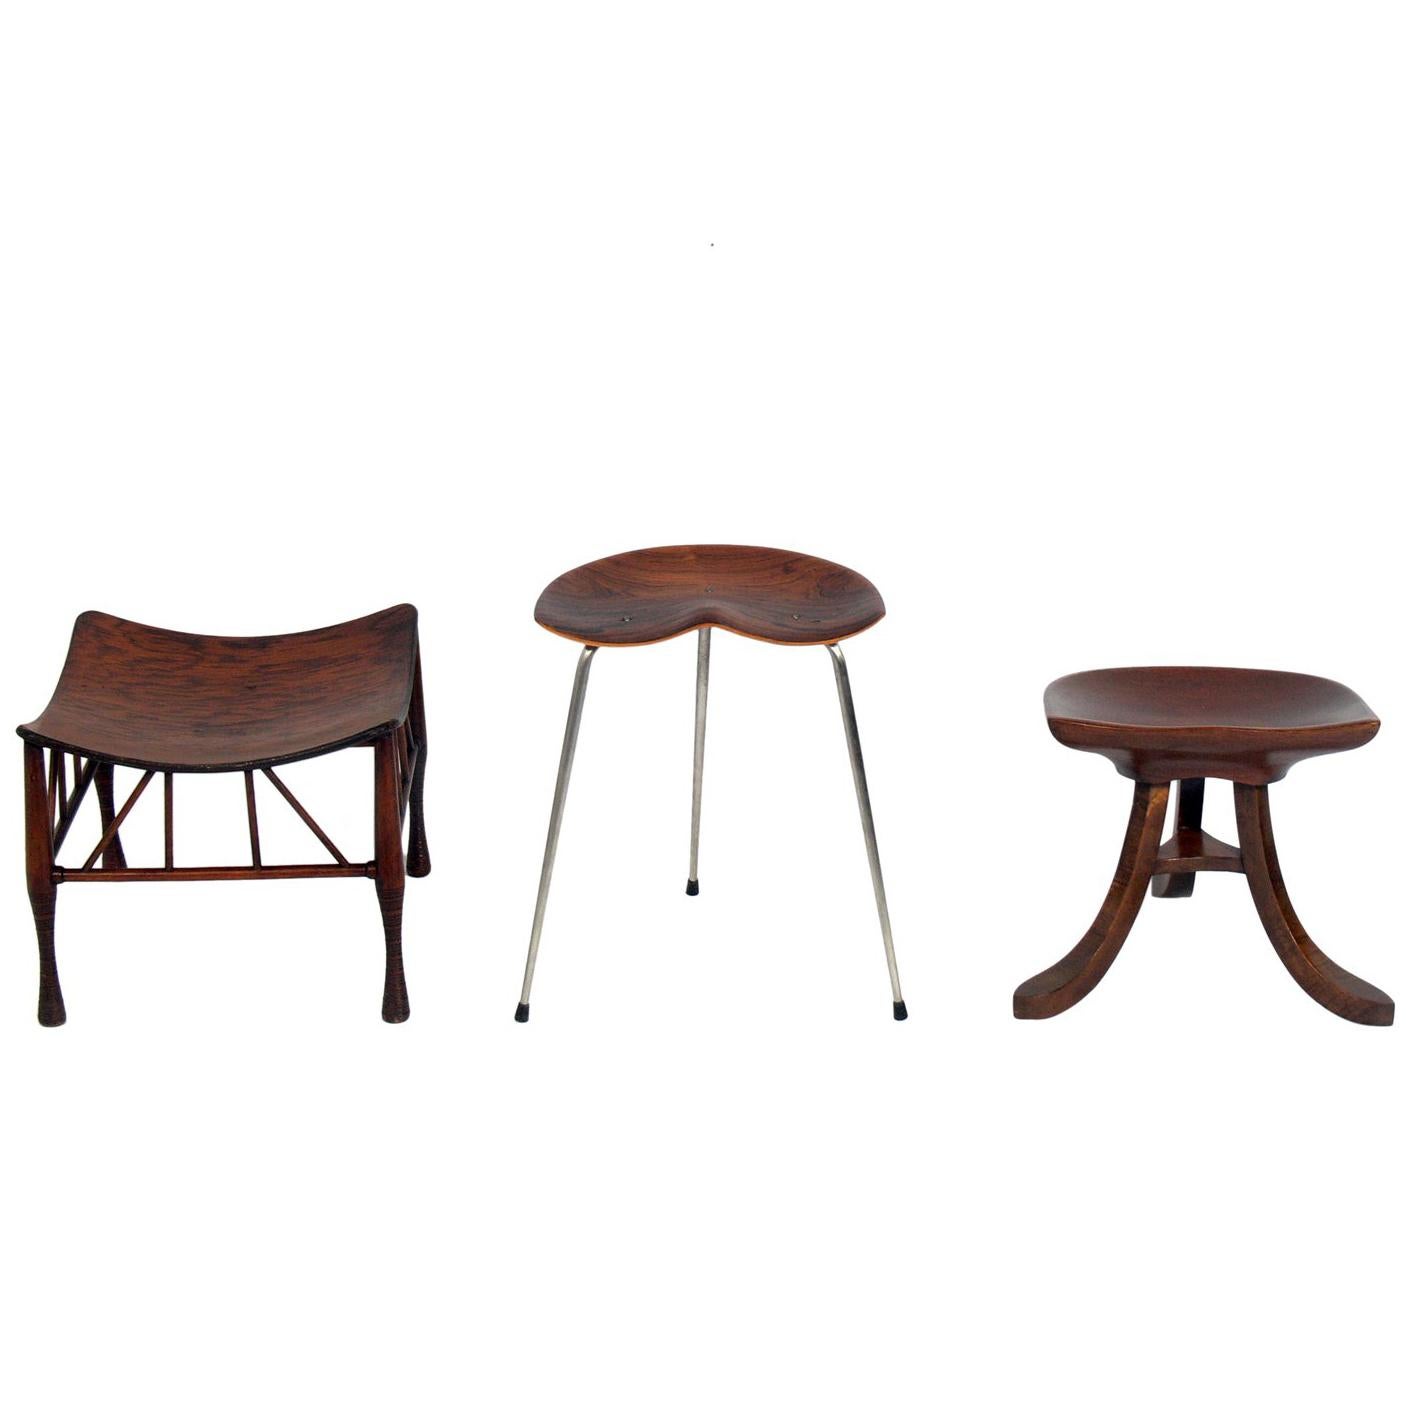 Selection of Sculptural Stools For Sale